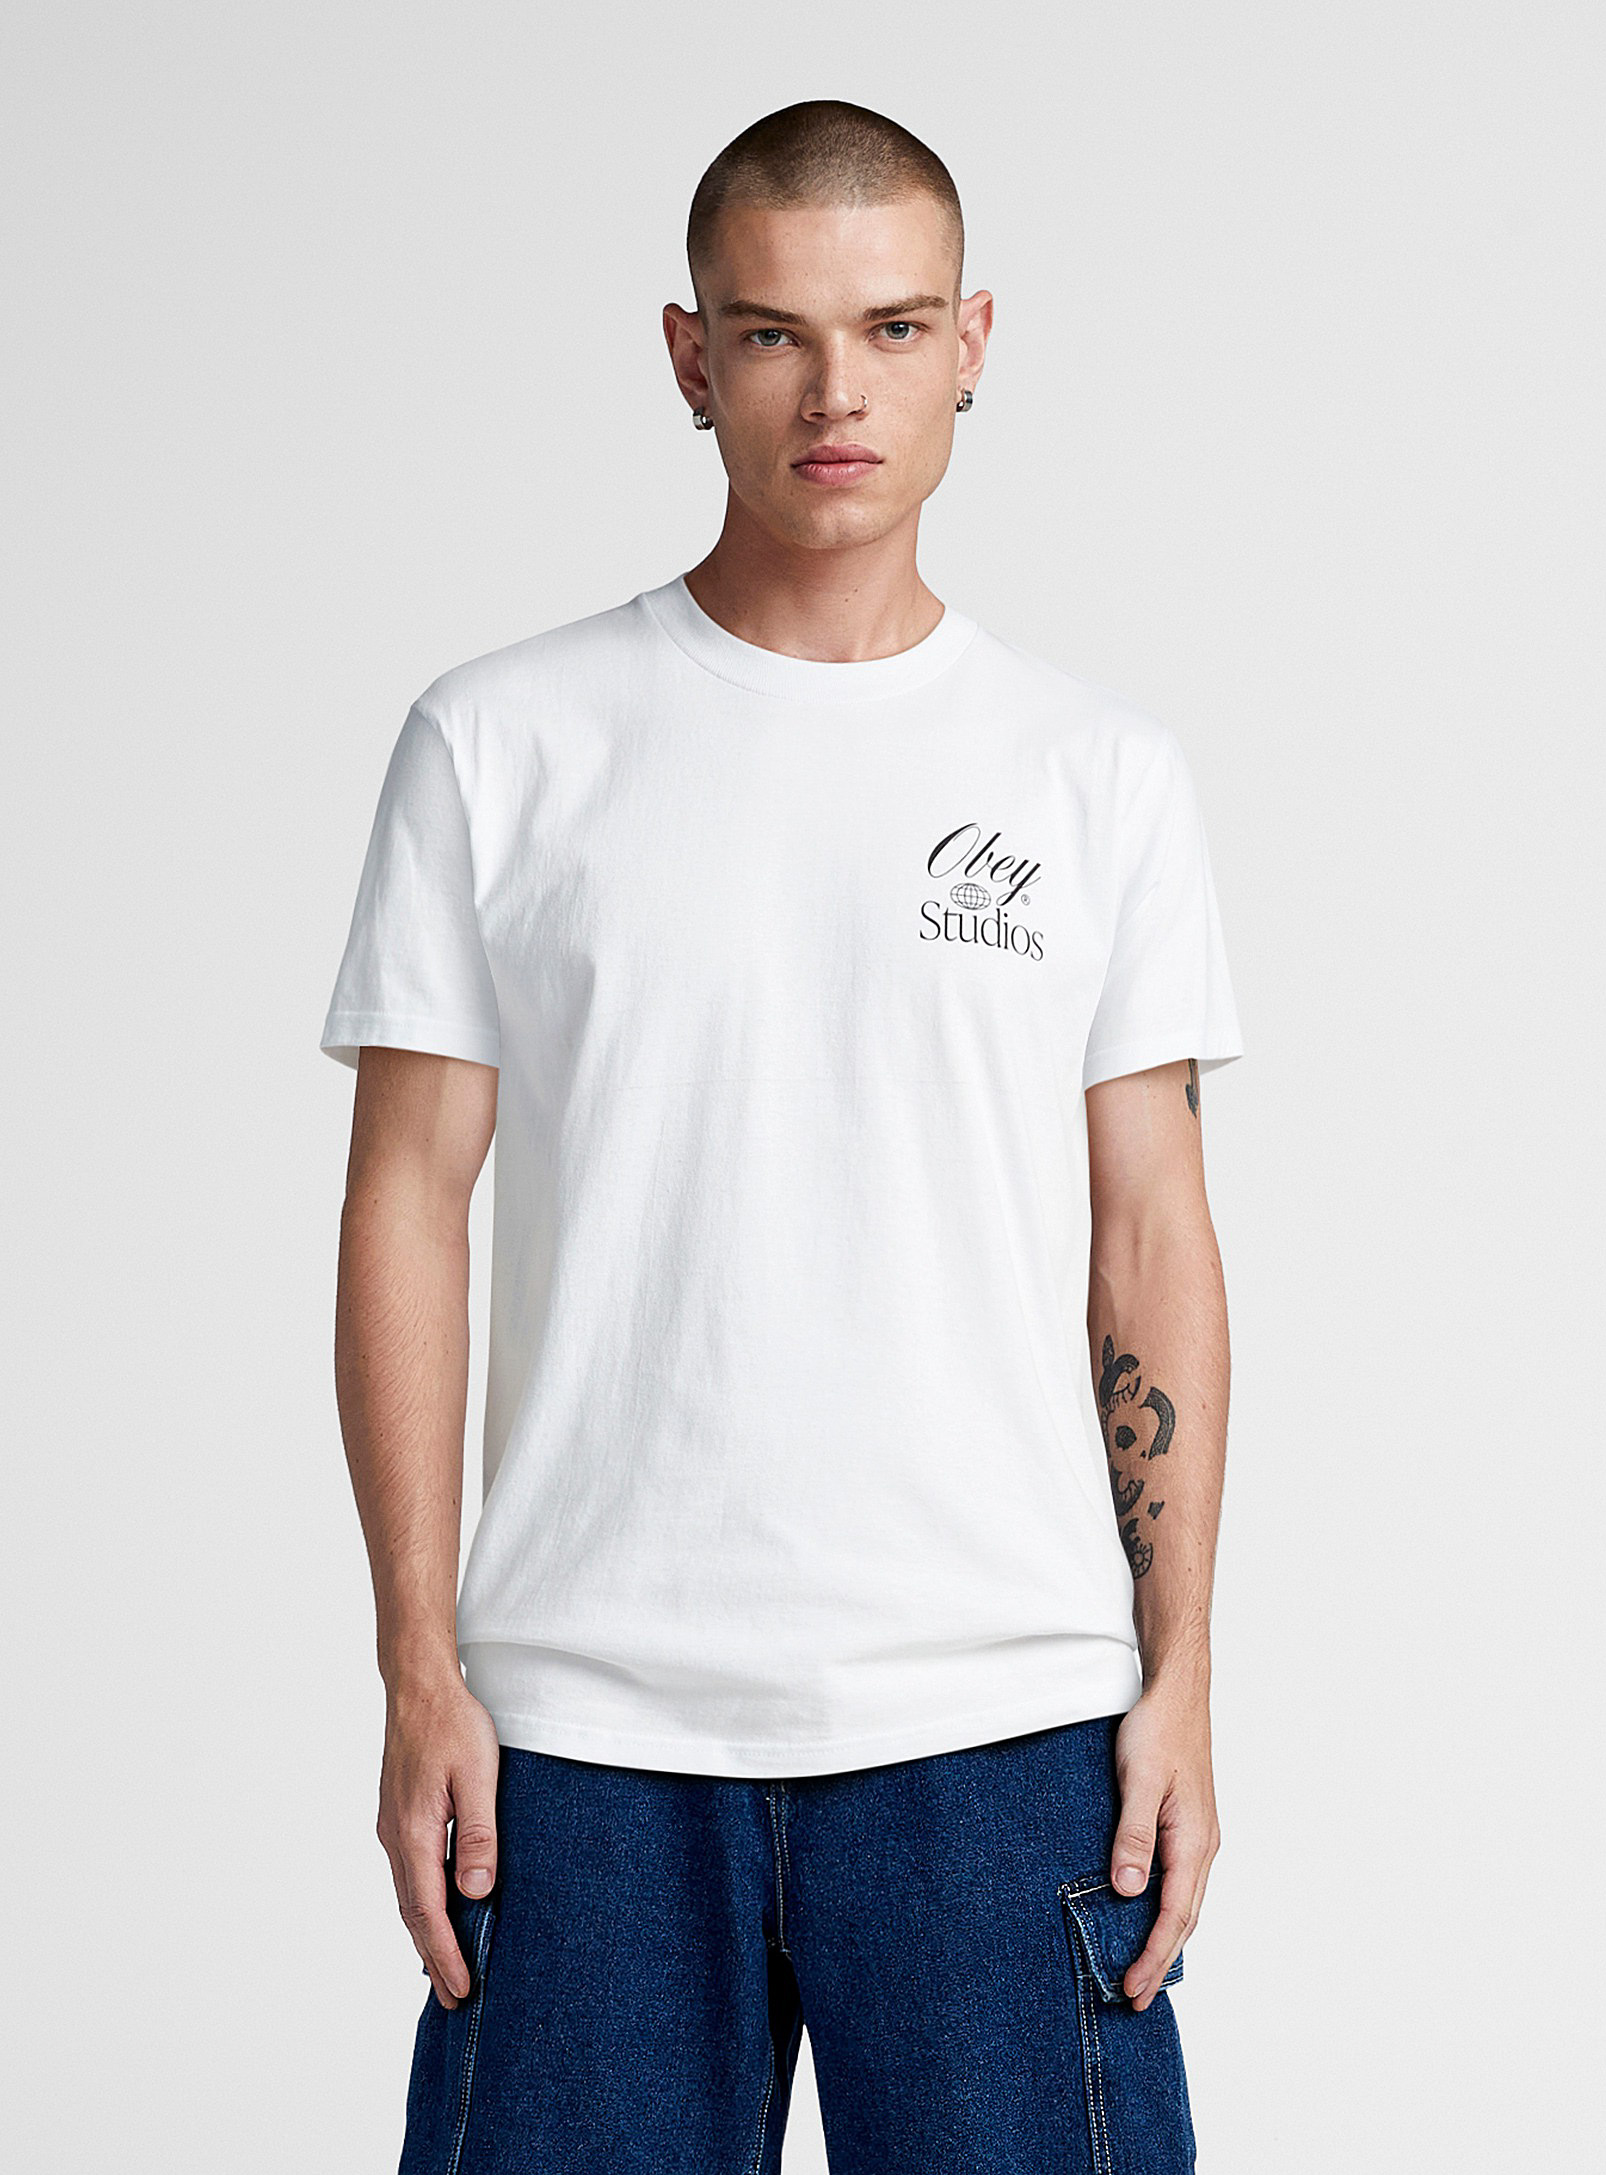 Obey Studios T-shirt In White